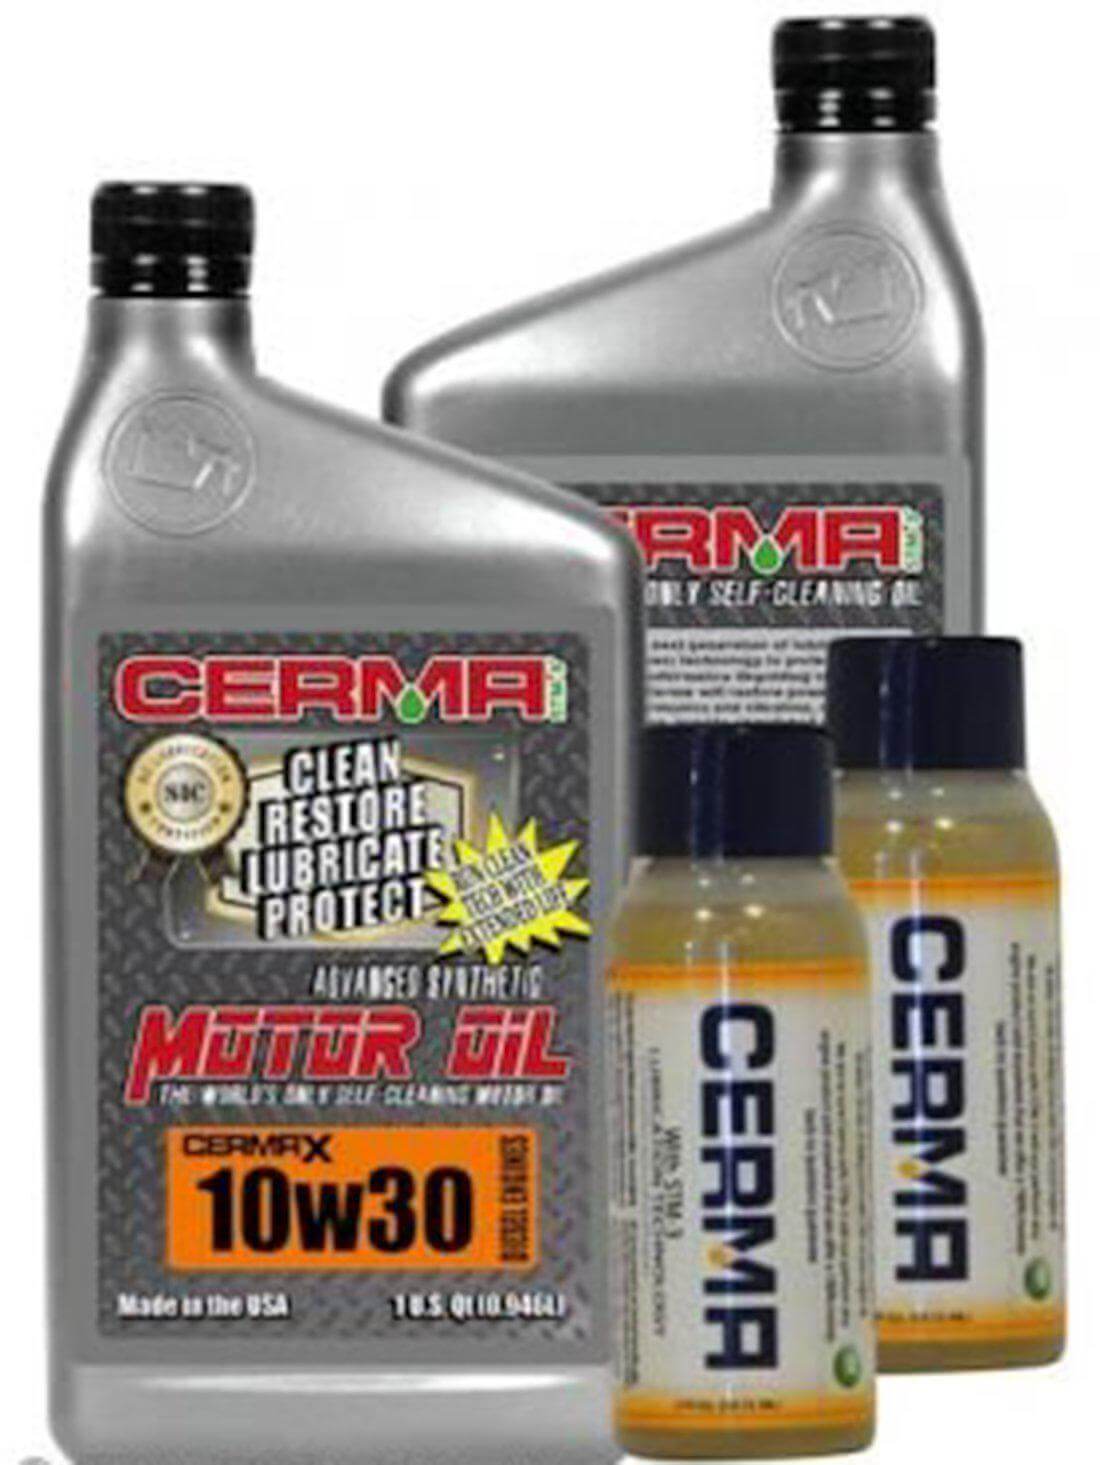 Cermax Diesel Ceramic Synthetic Oil Value Package for 3 To 4.8 Liter Engines at $214.5 only from cermatreatment.com